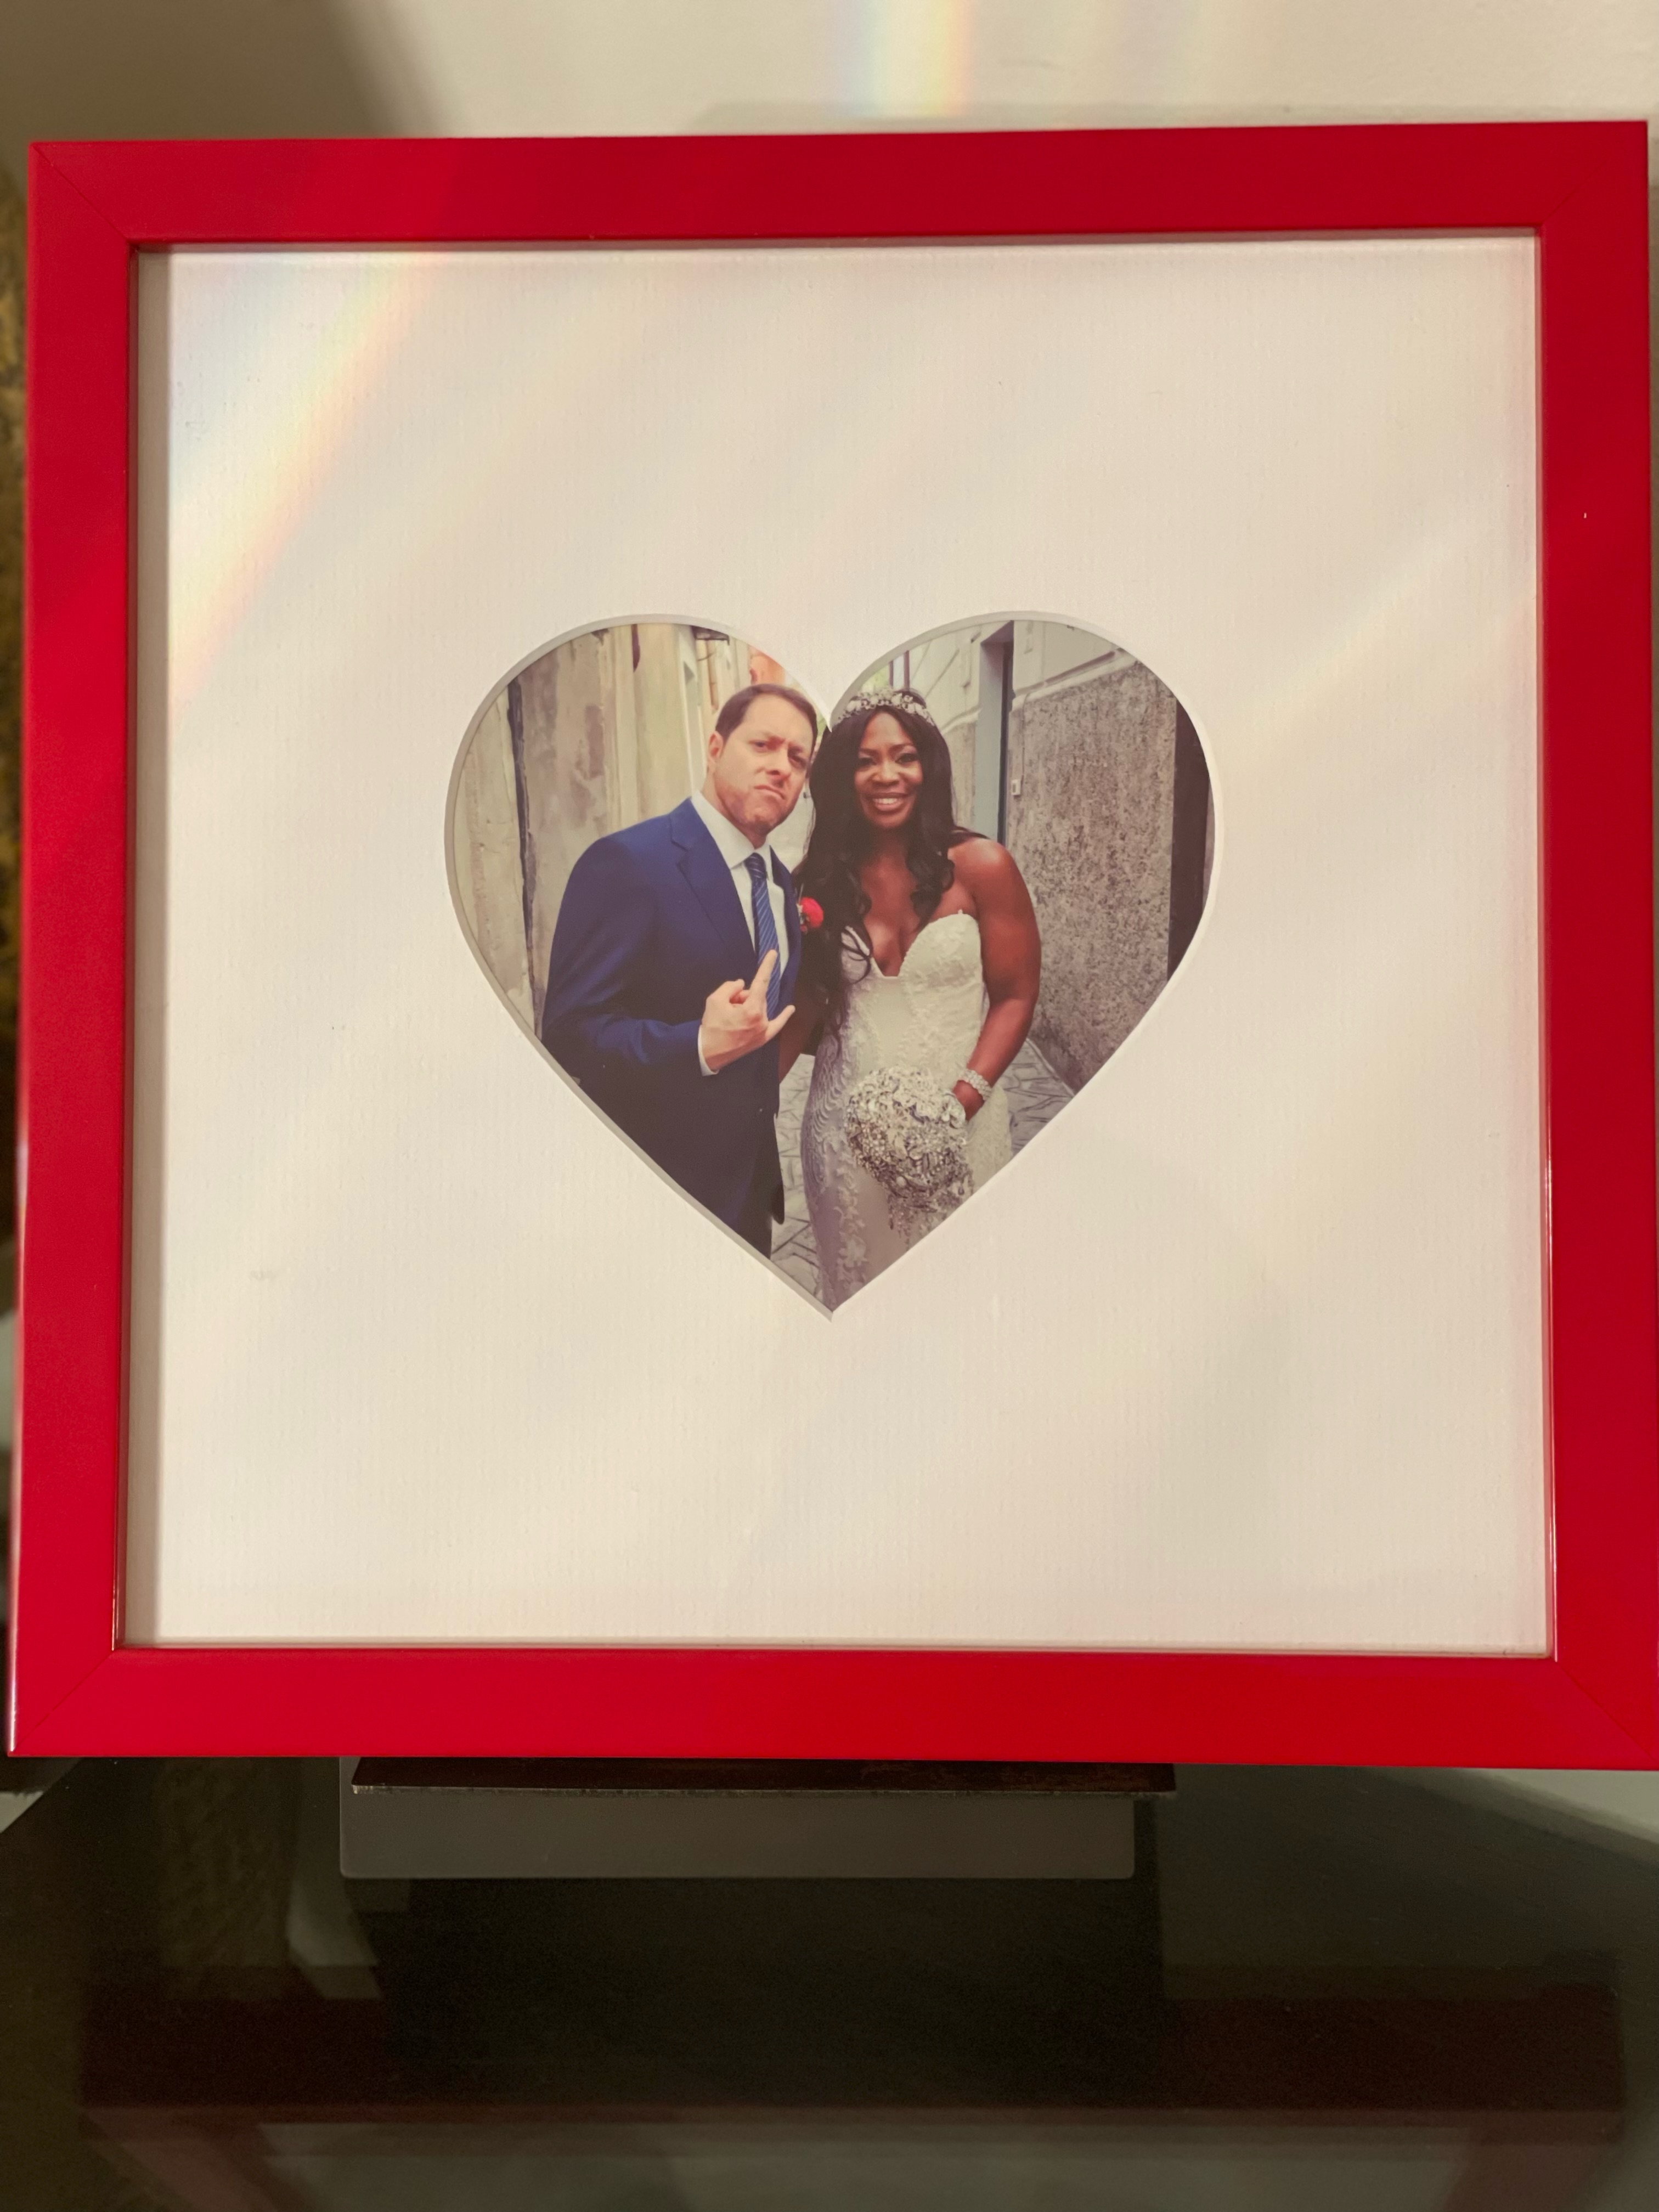 heartshaped mat in red frame of married couple